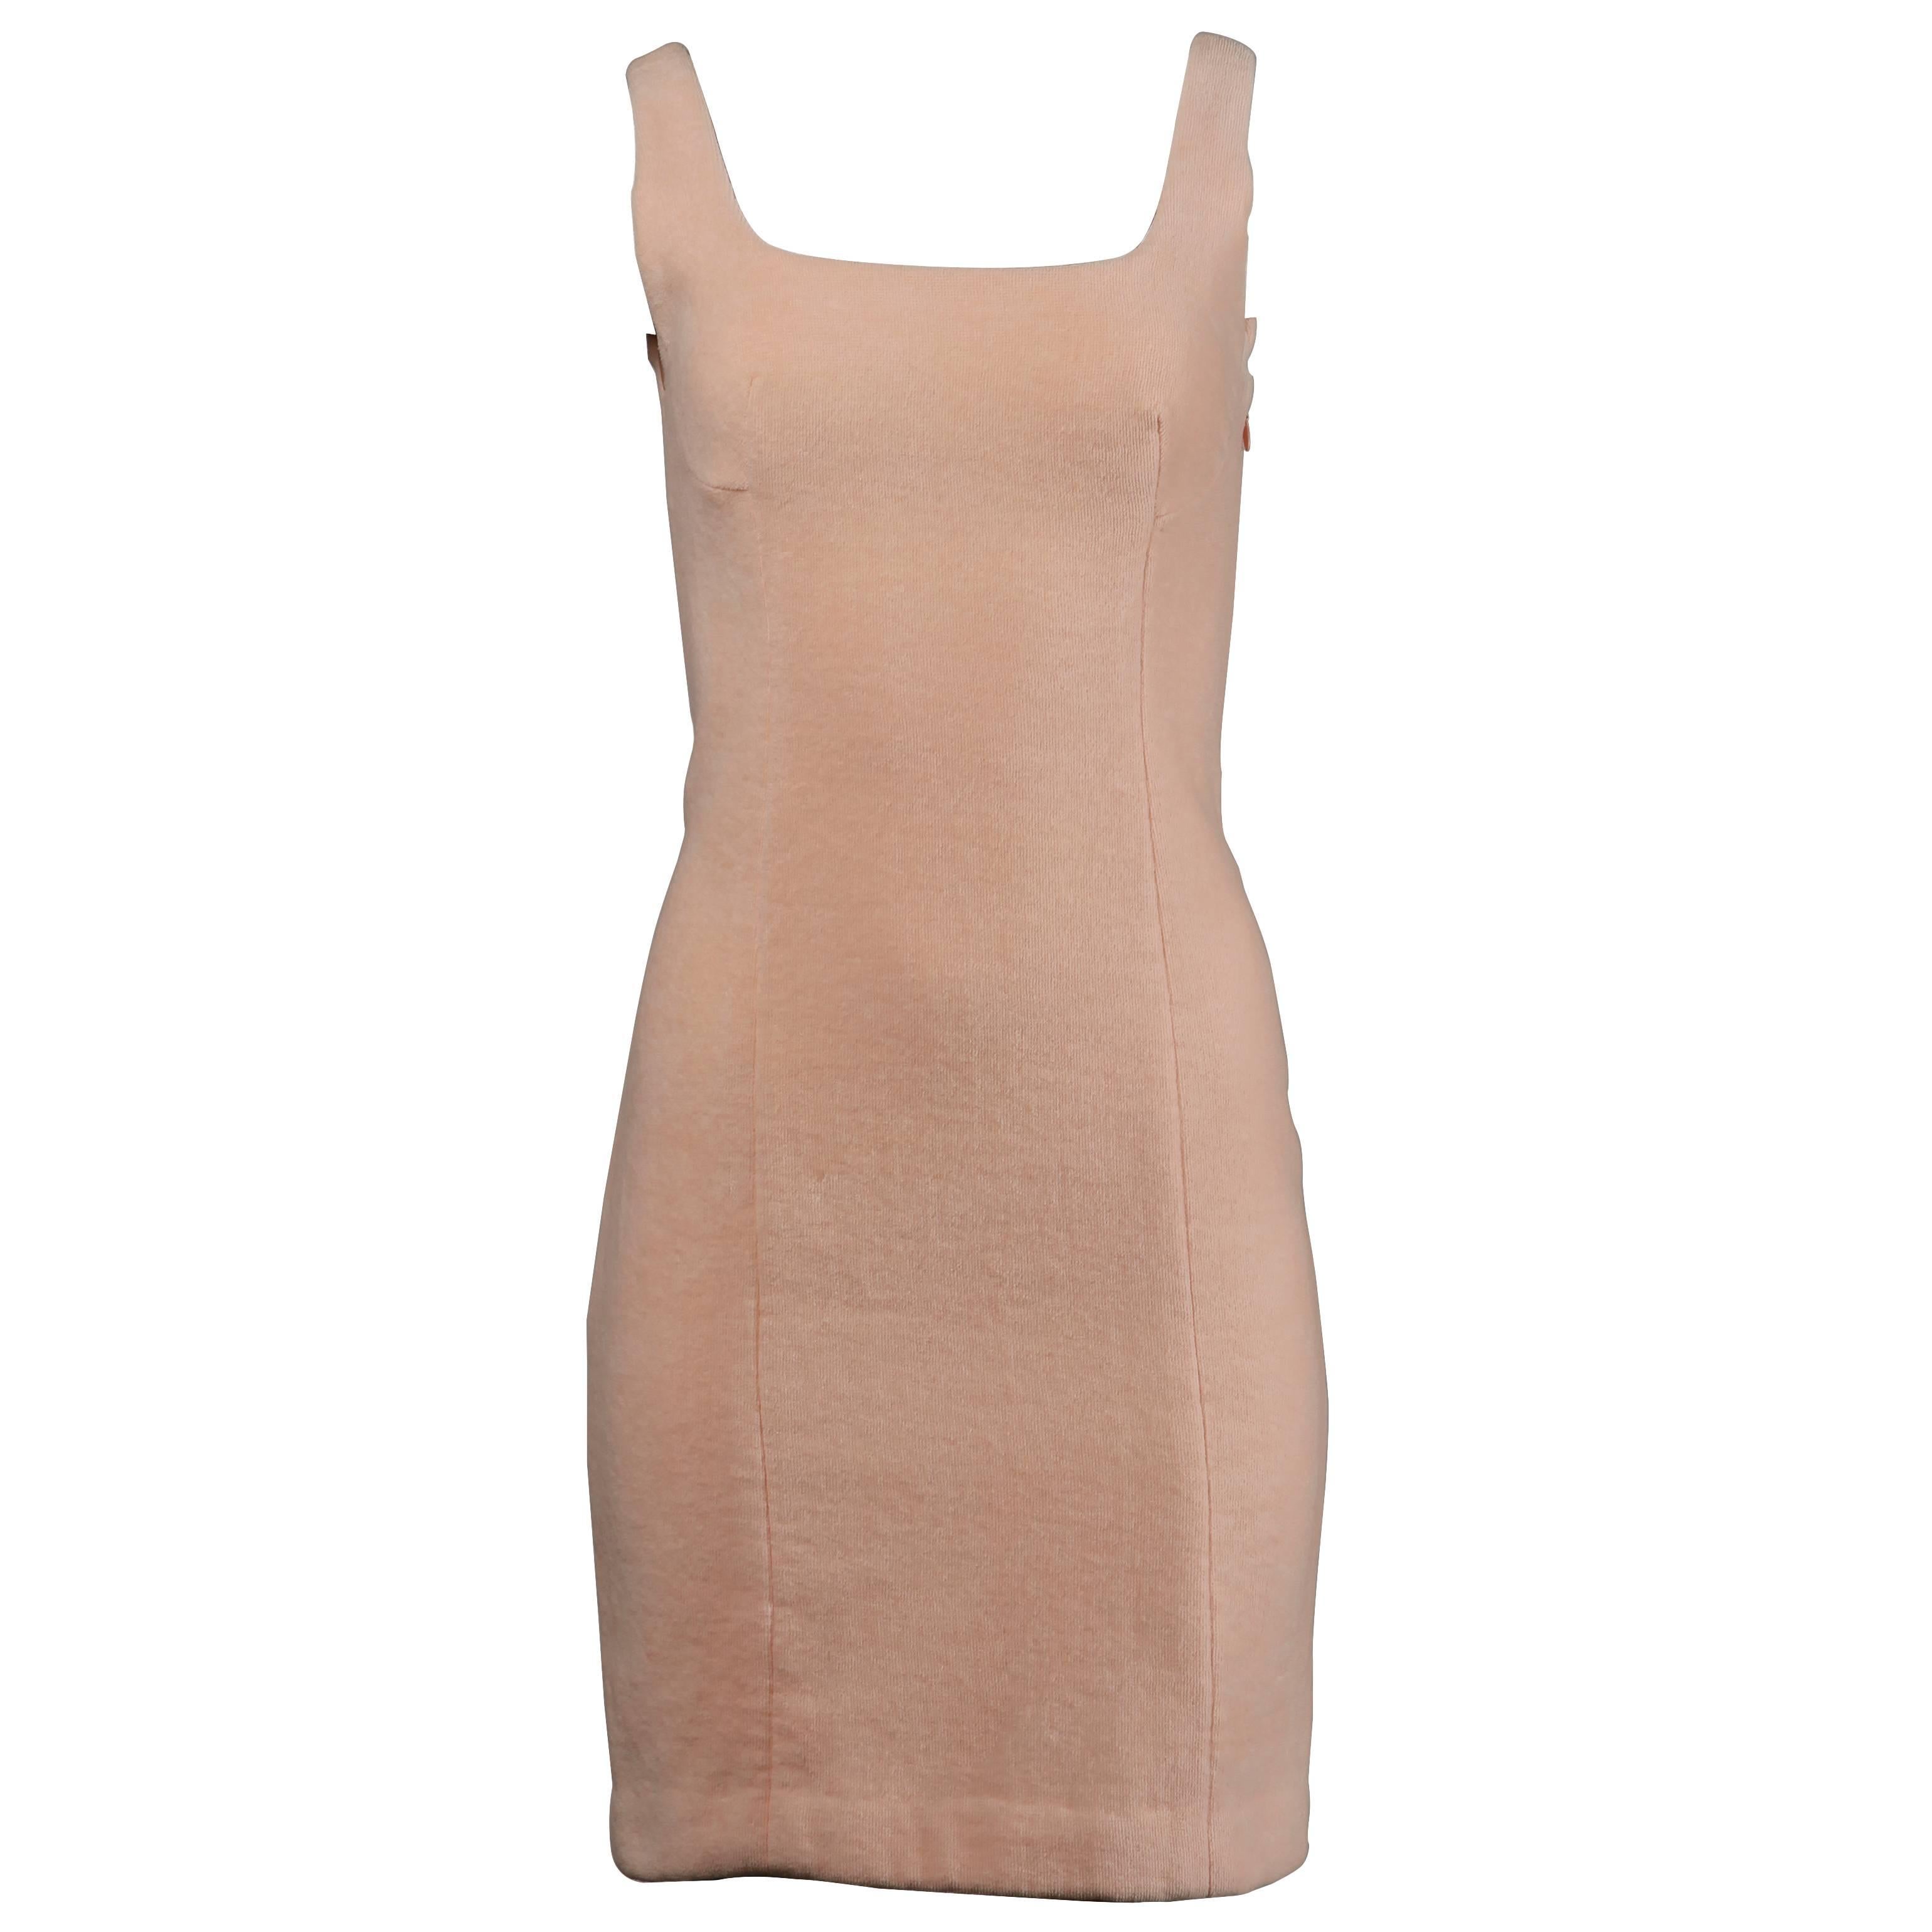 Gianni Versace Couture Vintage 1990s Pale Pink Chenille Body Con Dress